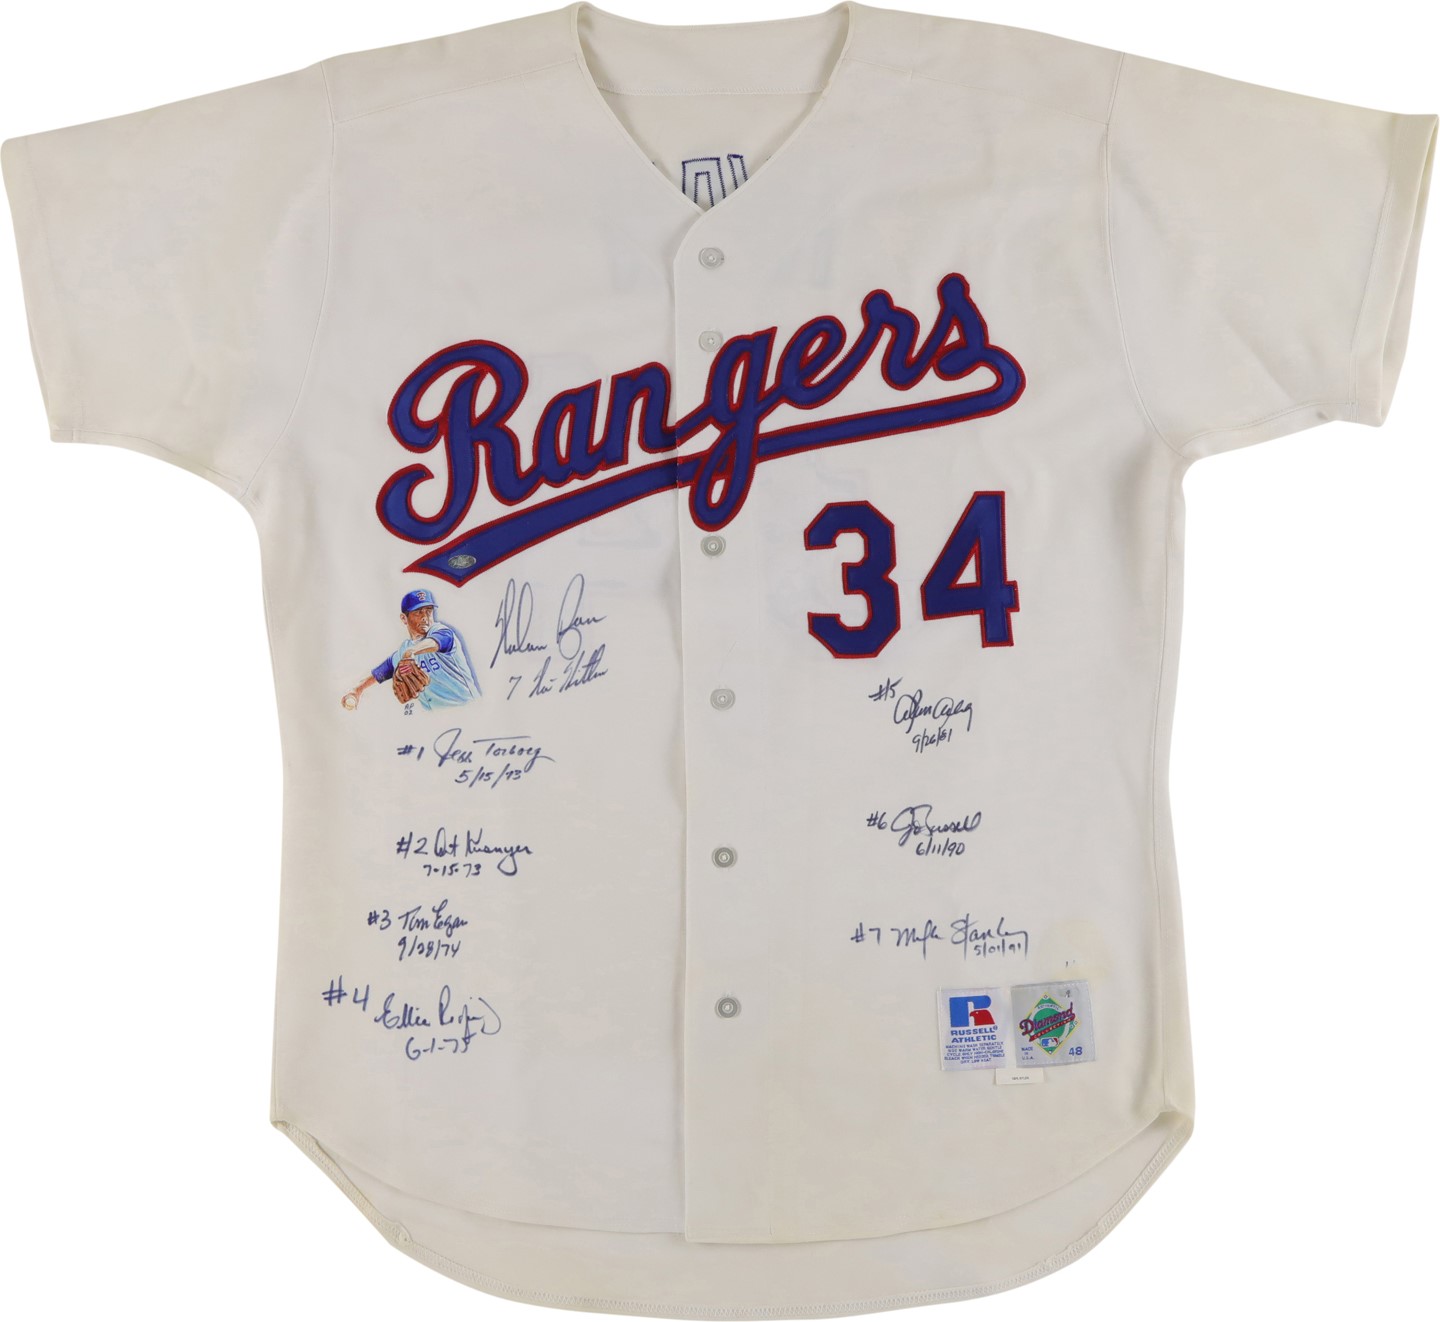 Baseball Autographs - Nolan Ryan "7 No-Hitters" 1 of 1 Hand Painted Jersey - Signed by Ryan and the Catchers who Caught Each No-Hitter (Ryan Holo) (PSA)